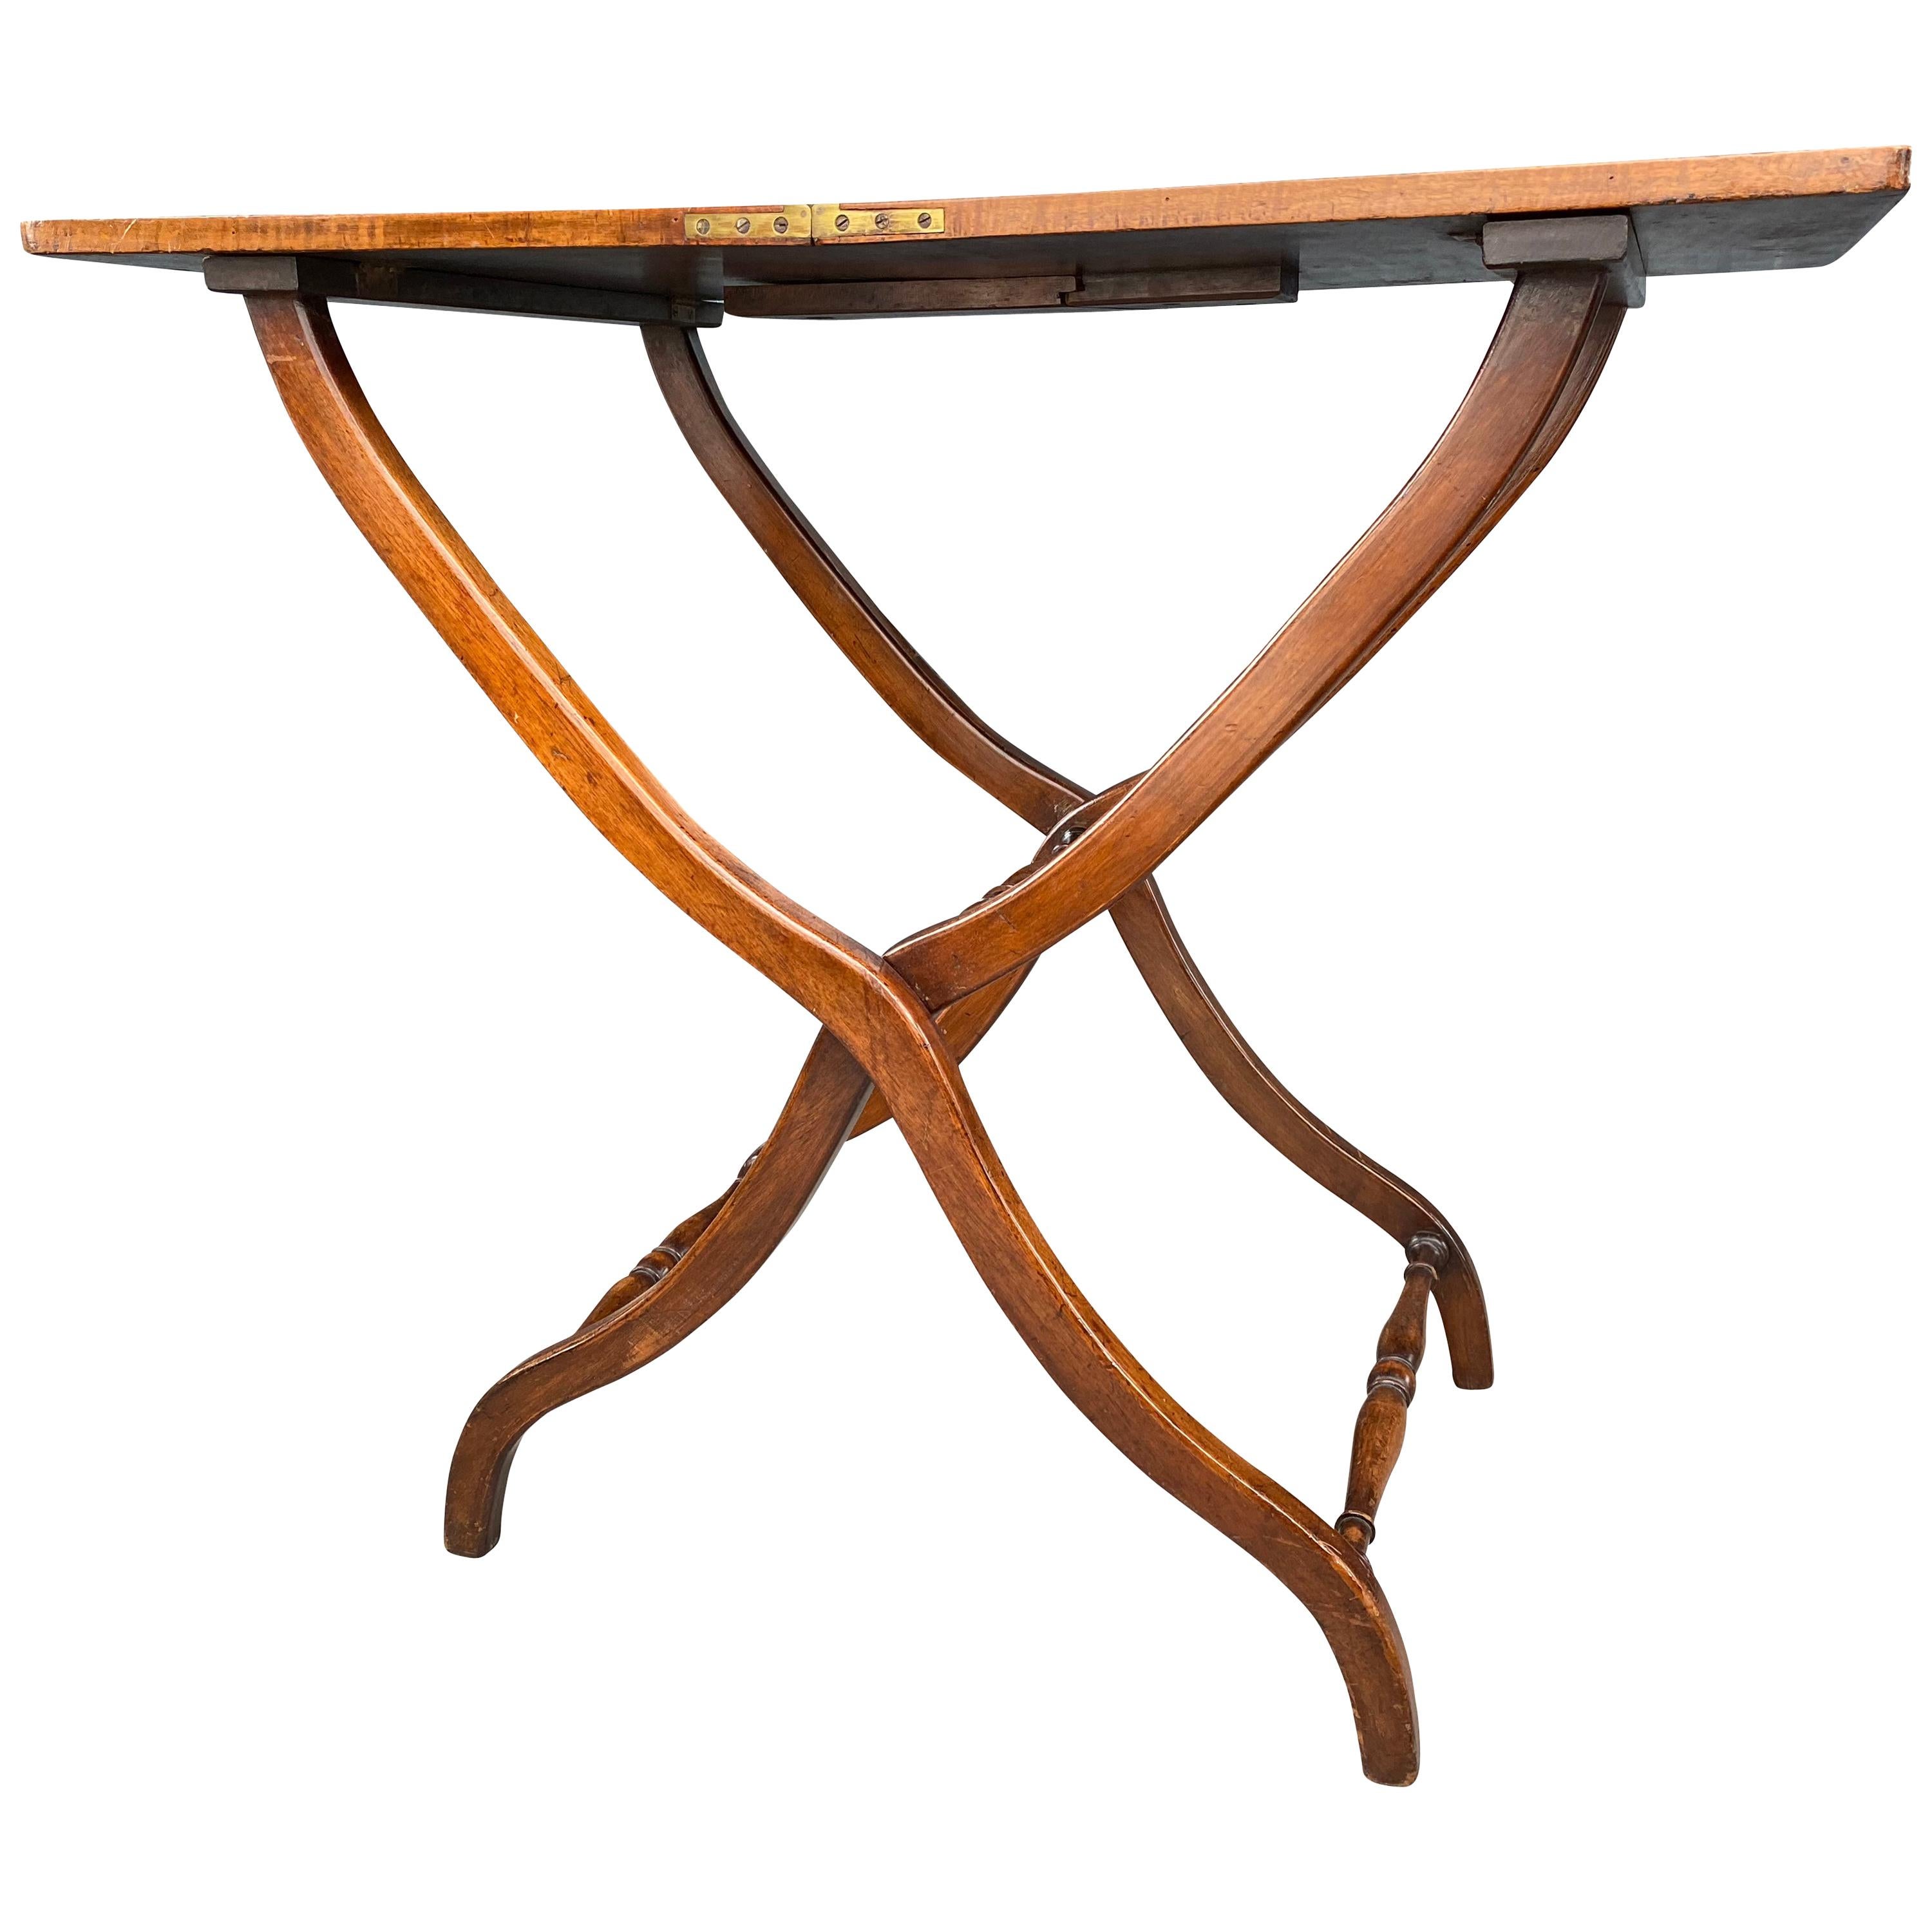 Victorian Fiddleback Mahogany Campaign Coaching Table